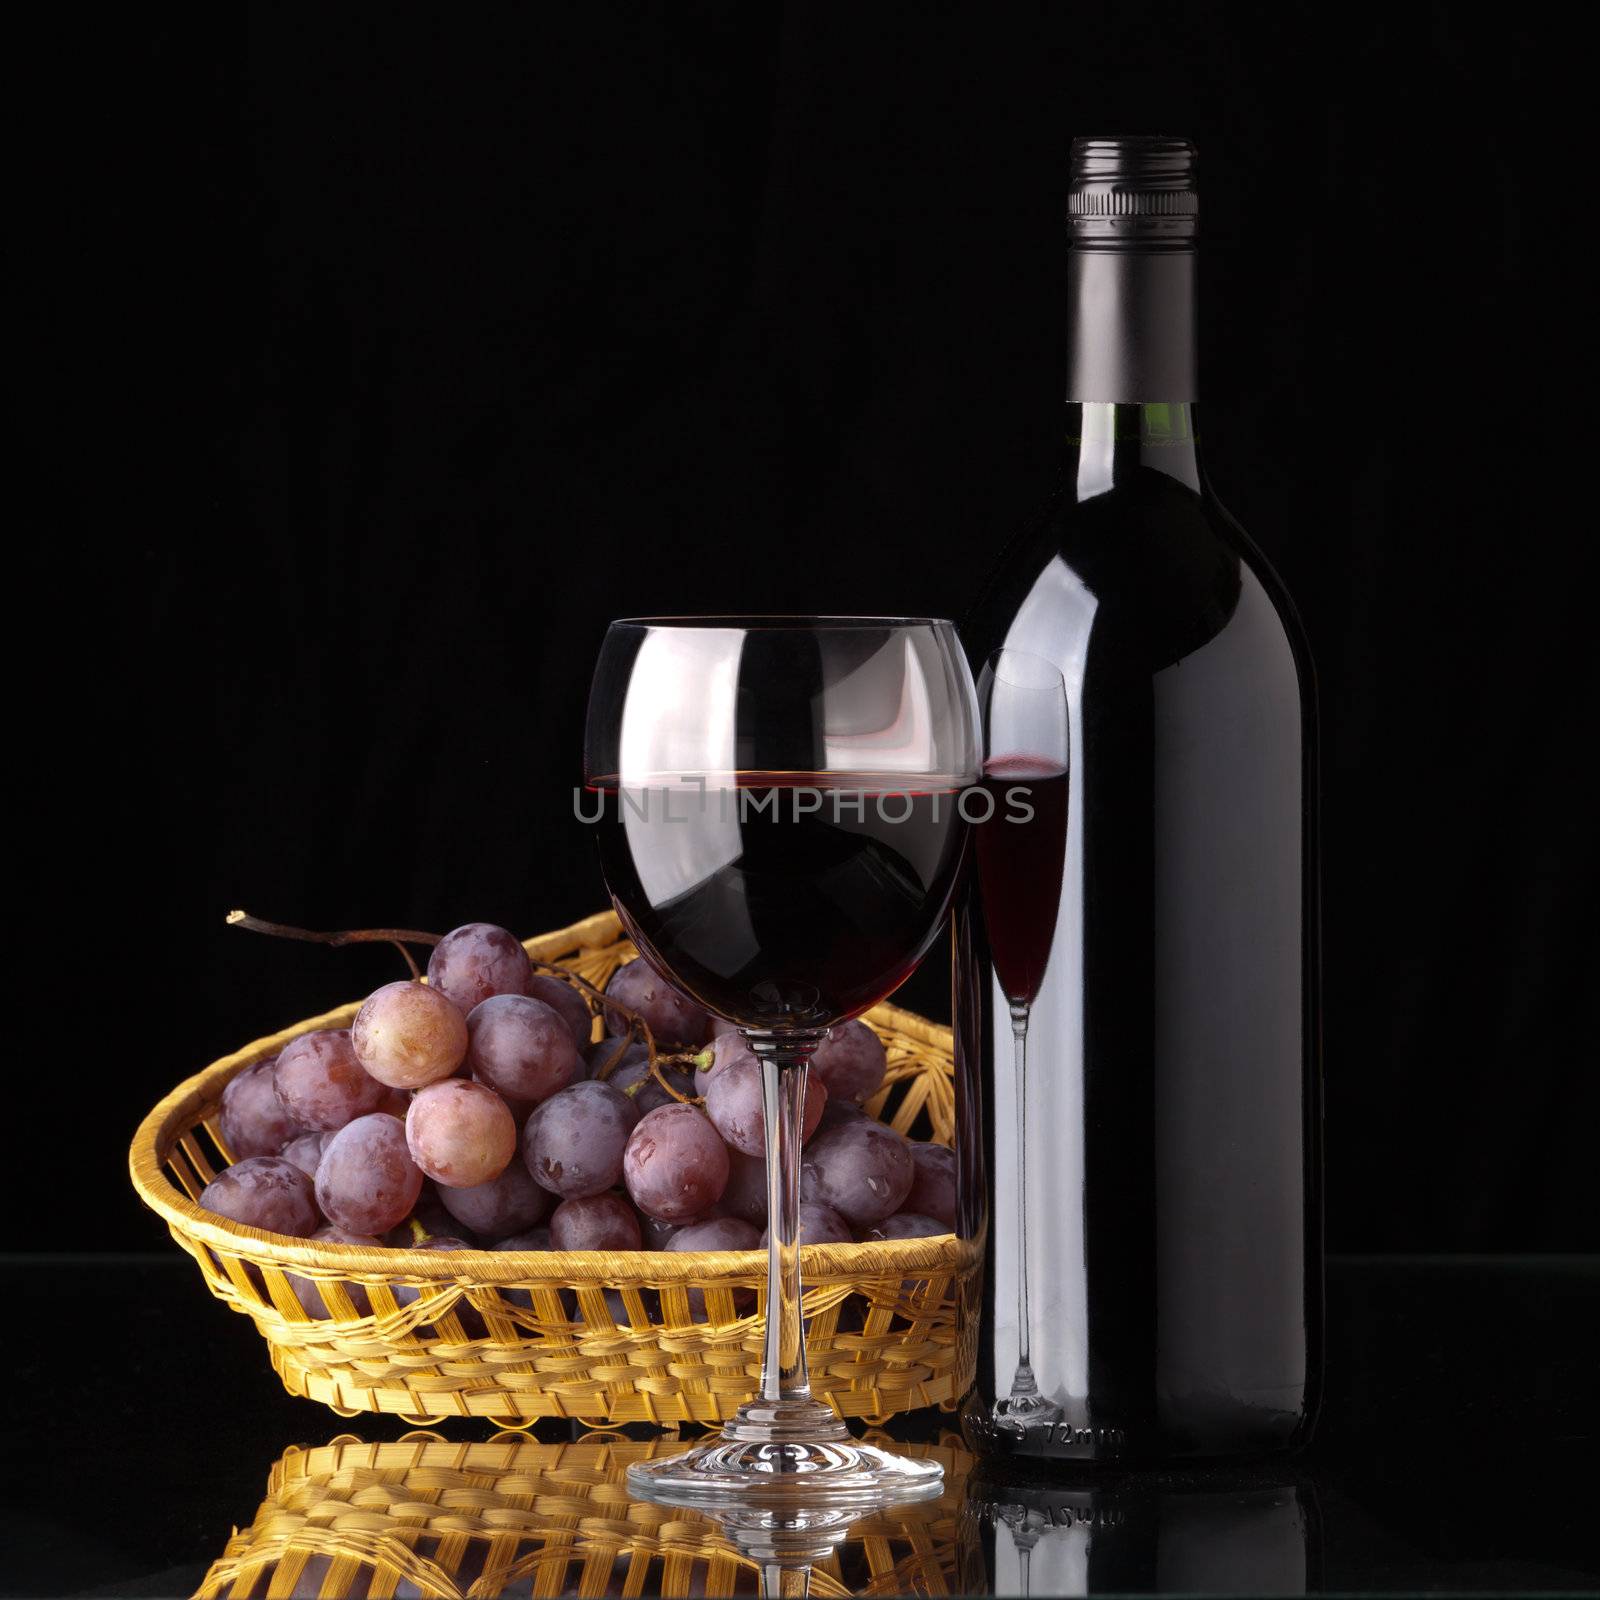 A bottle of red wine, glass and grapes by Antartis